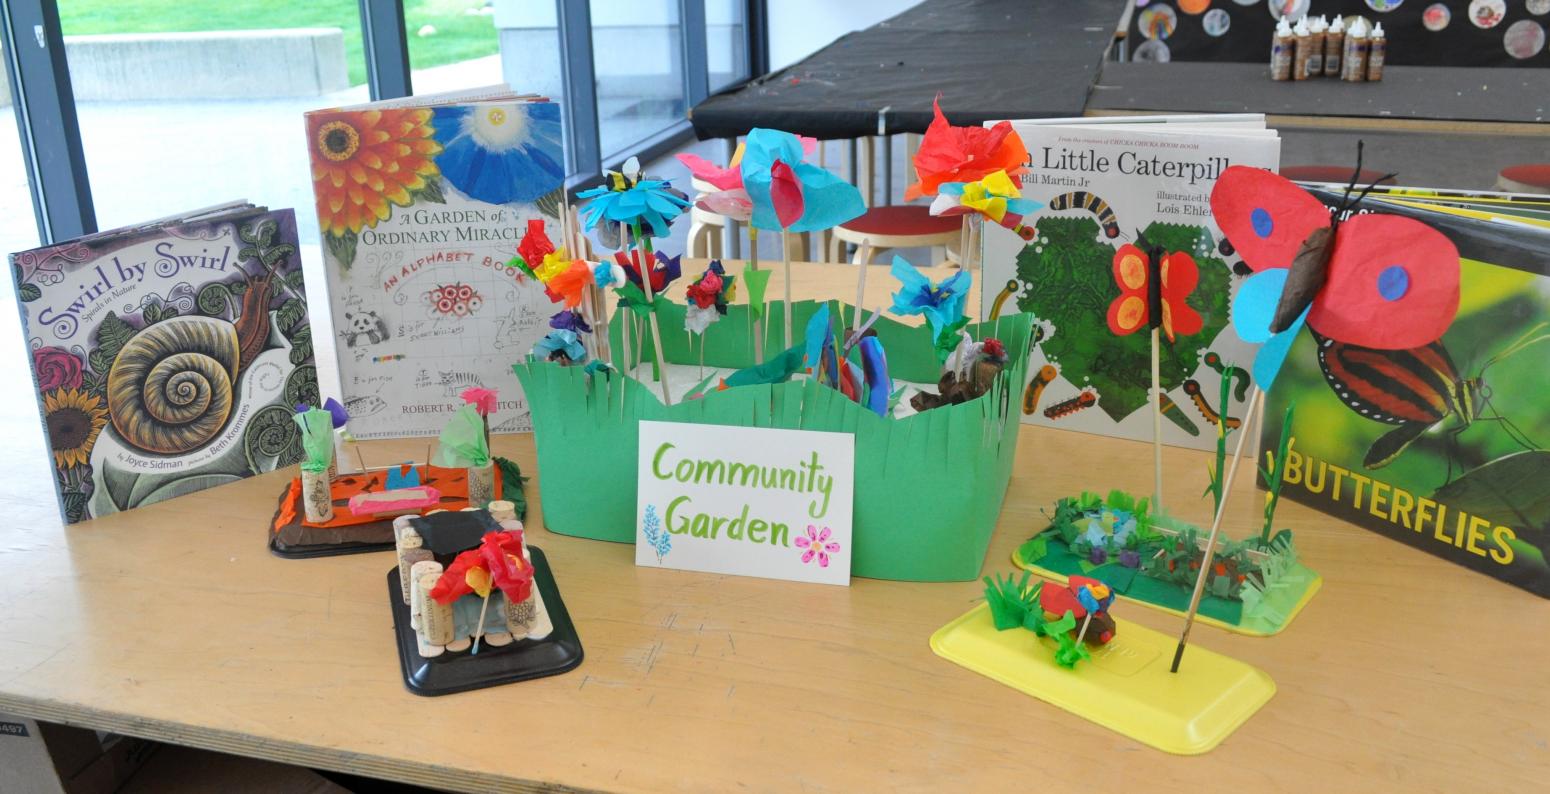 A community garden sculpture made of tissue paper collages with a backdrop of picture books about nature.